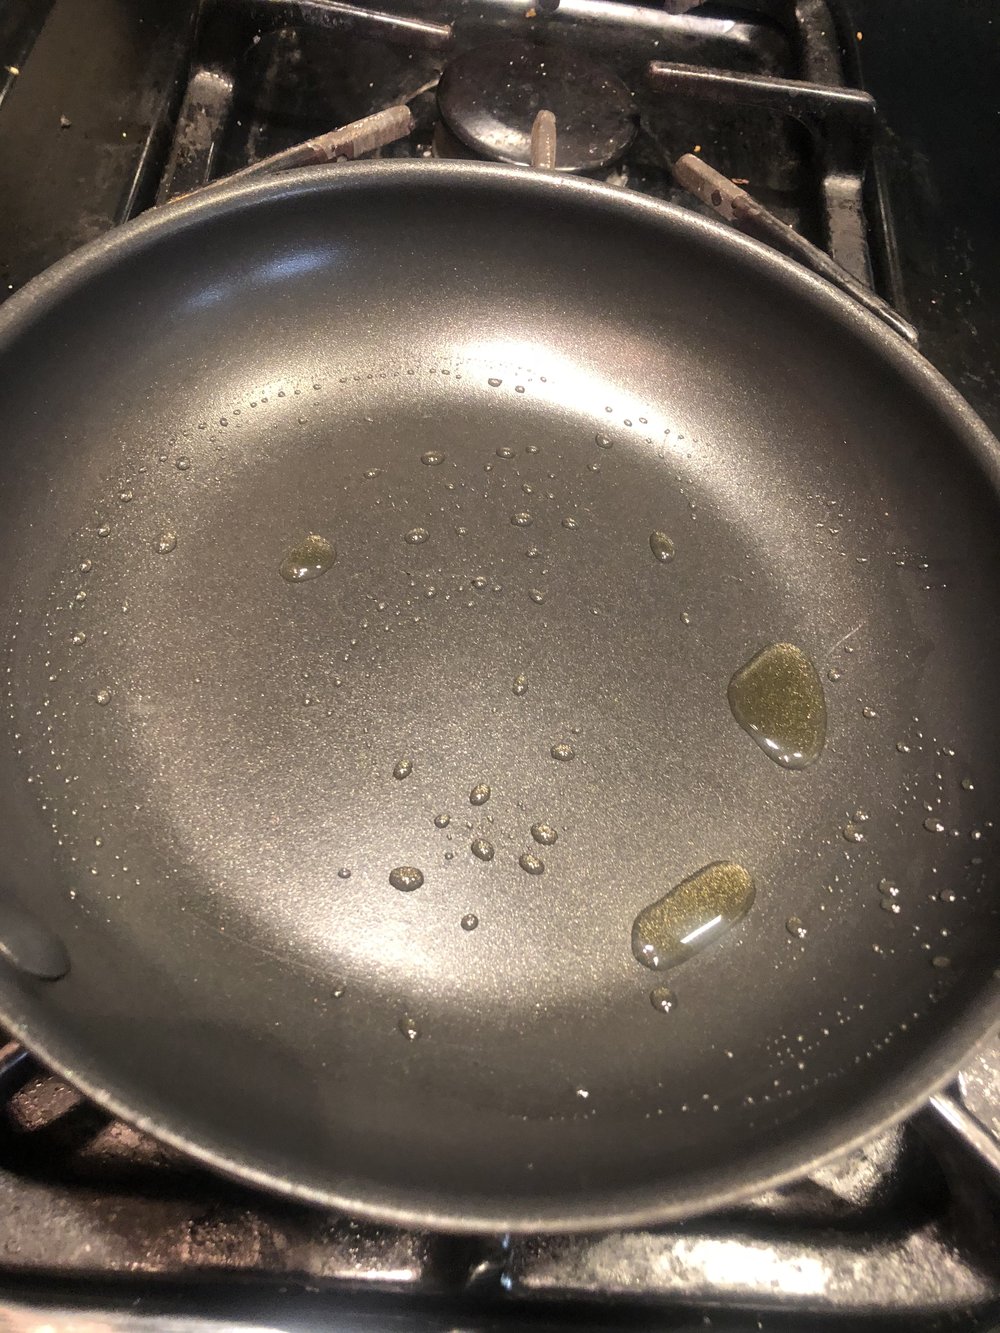  Pour a ladle of batter into the nonstick pan, the size of a 6” corn tortilla. Smooth it over with the back of a spoon. Let cook for 1 1/2 minutes.  